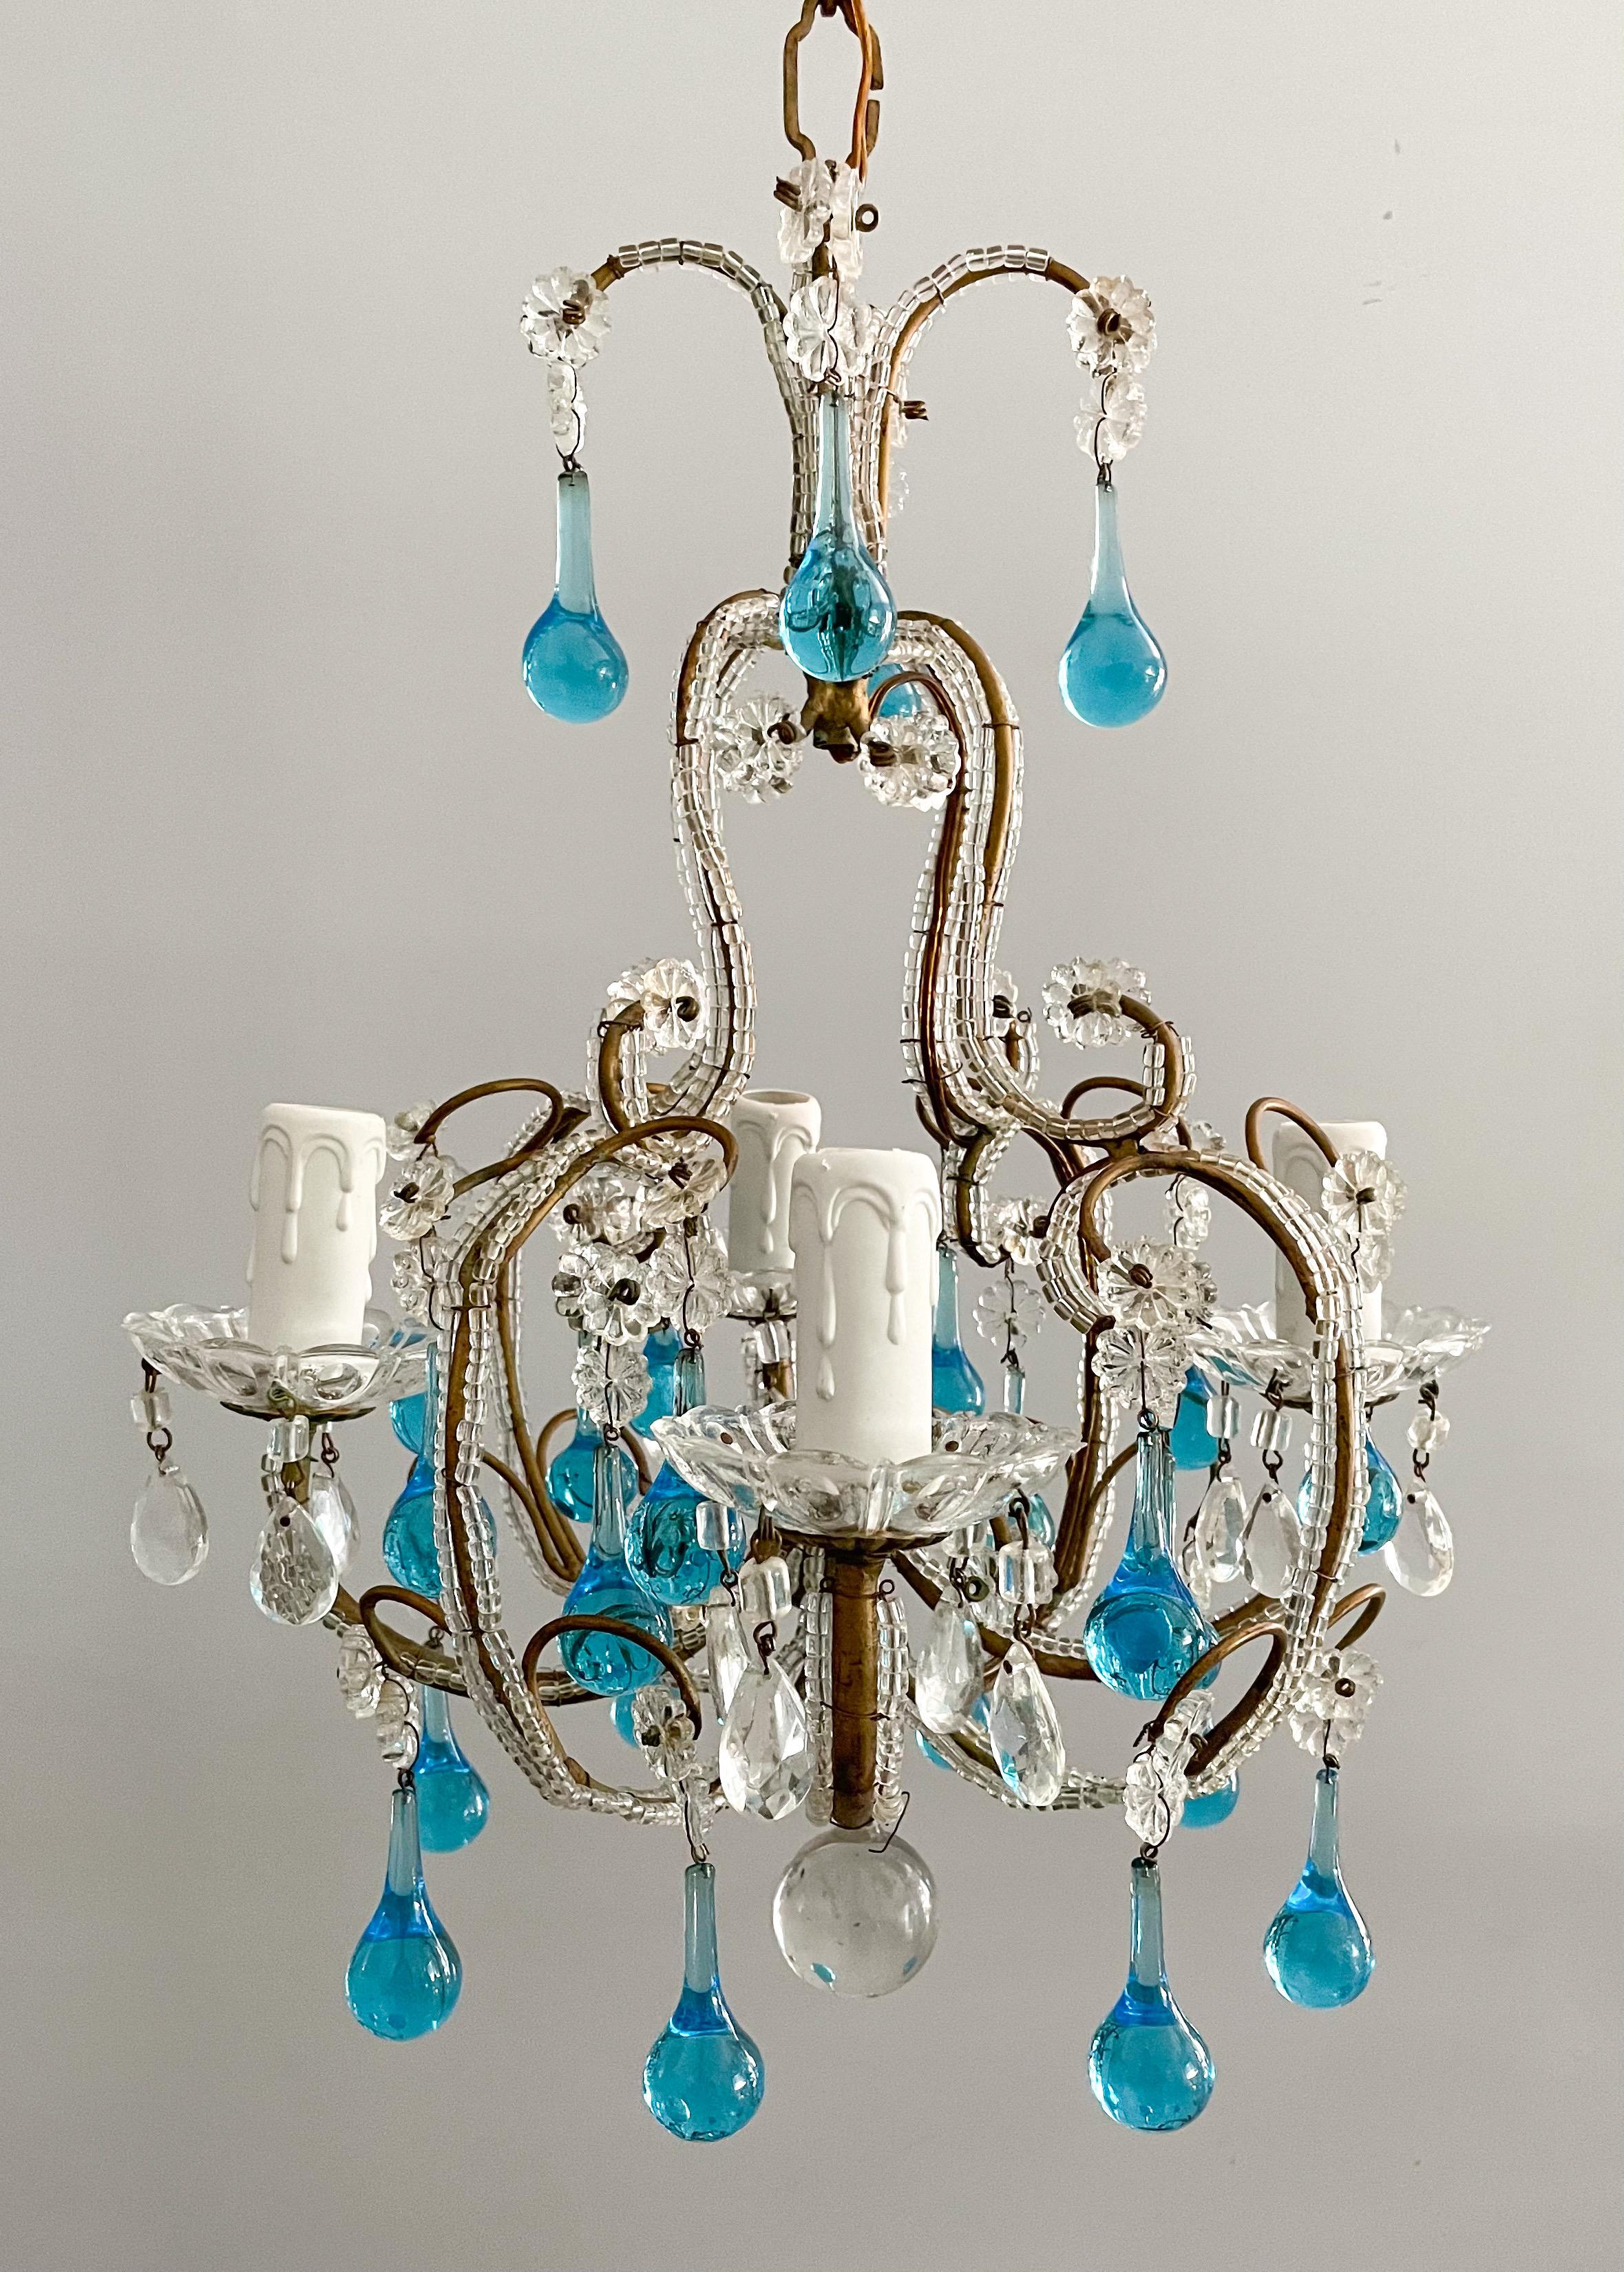 Beautiful, vintage Italian crystal beaded chandelier with Murano glass drops.

The chandelier consists of a small-scale gilded iron frame outlined with tiny glass beads and decorated with turquoise glass ball drops. 

The chandelier is wired and